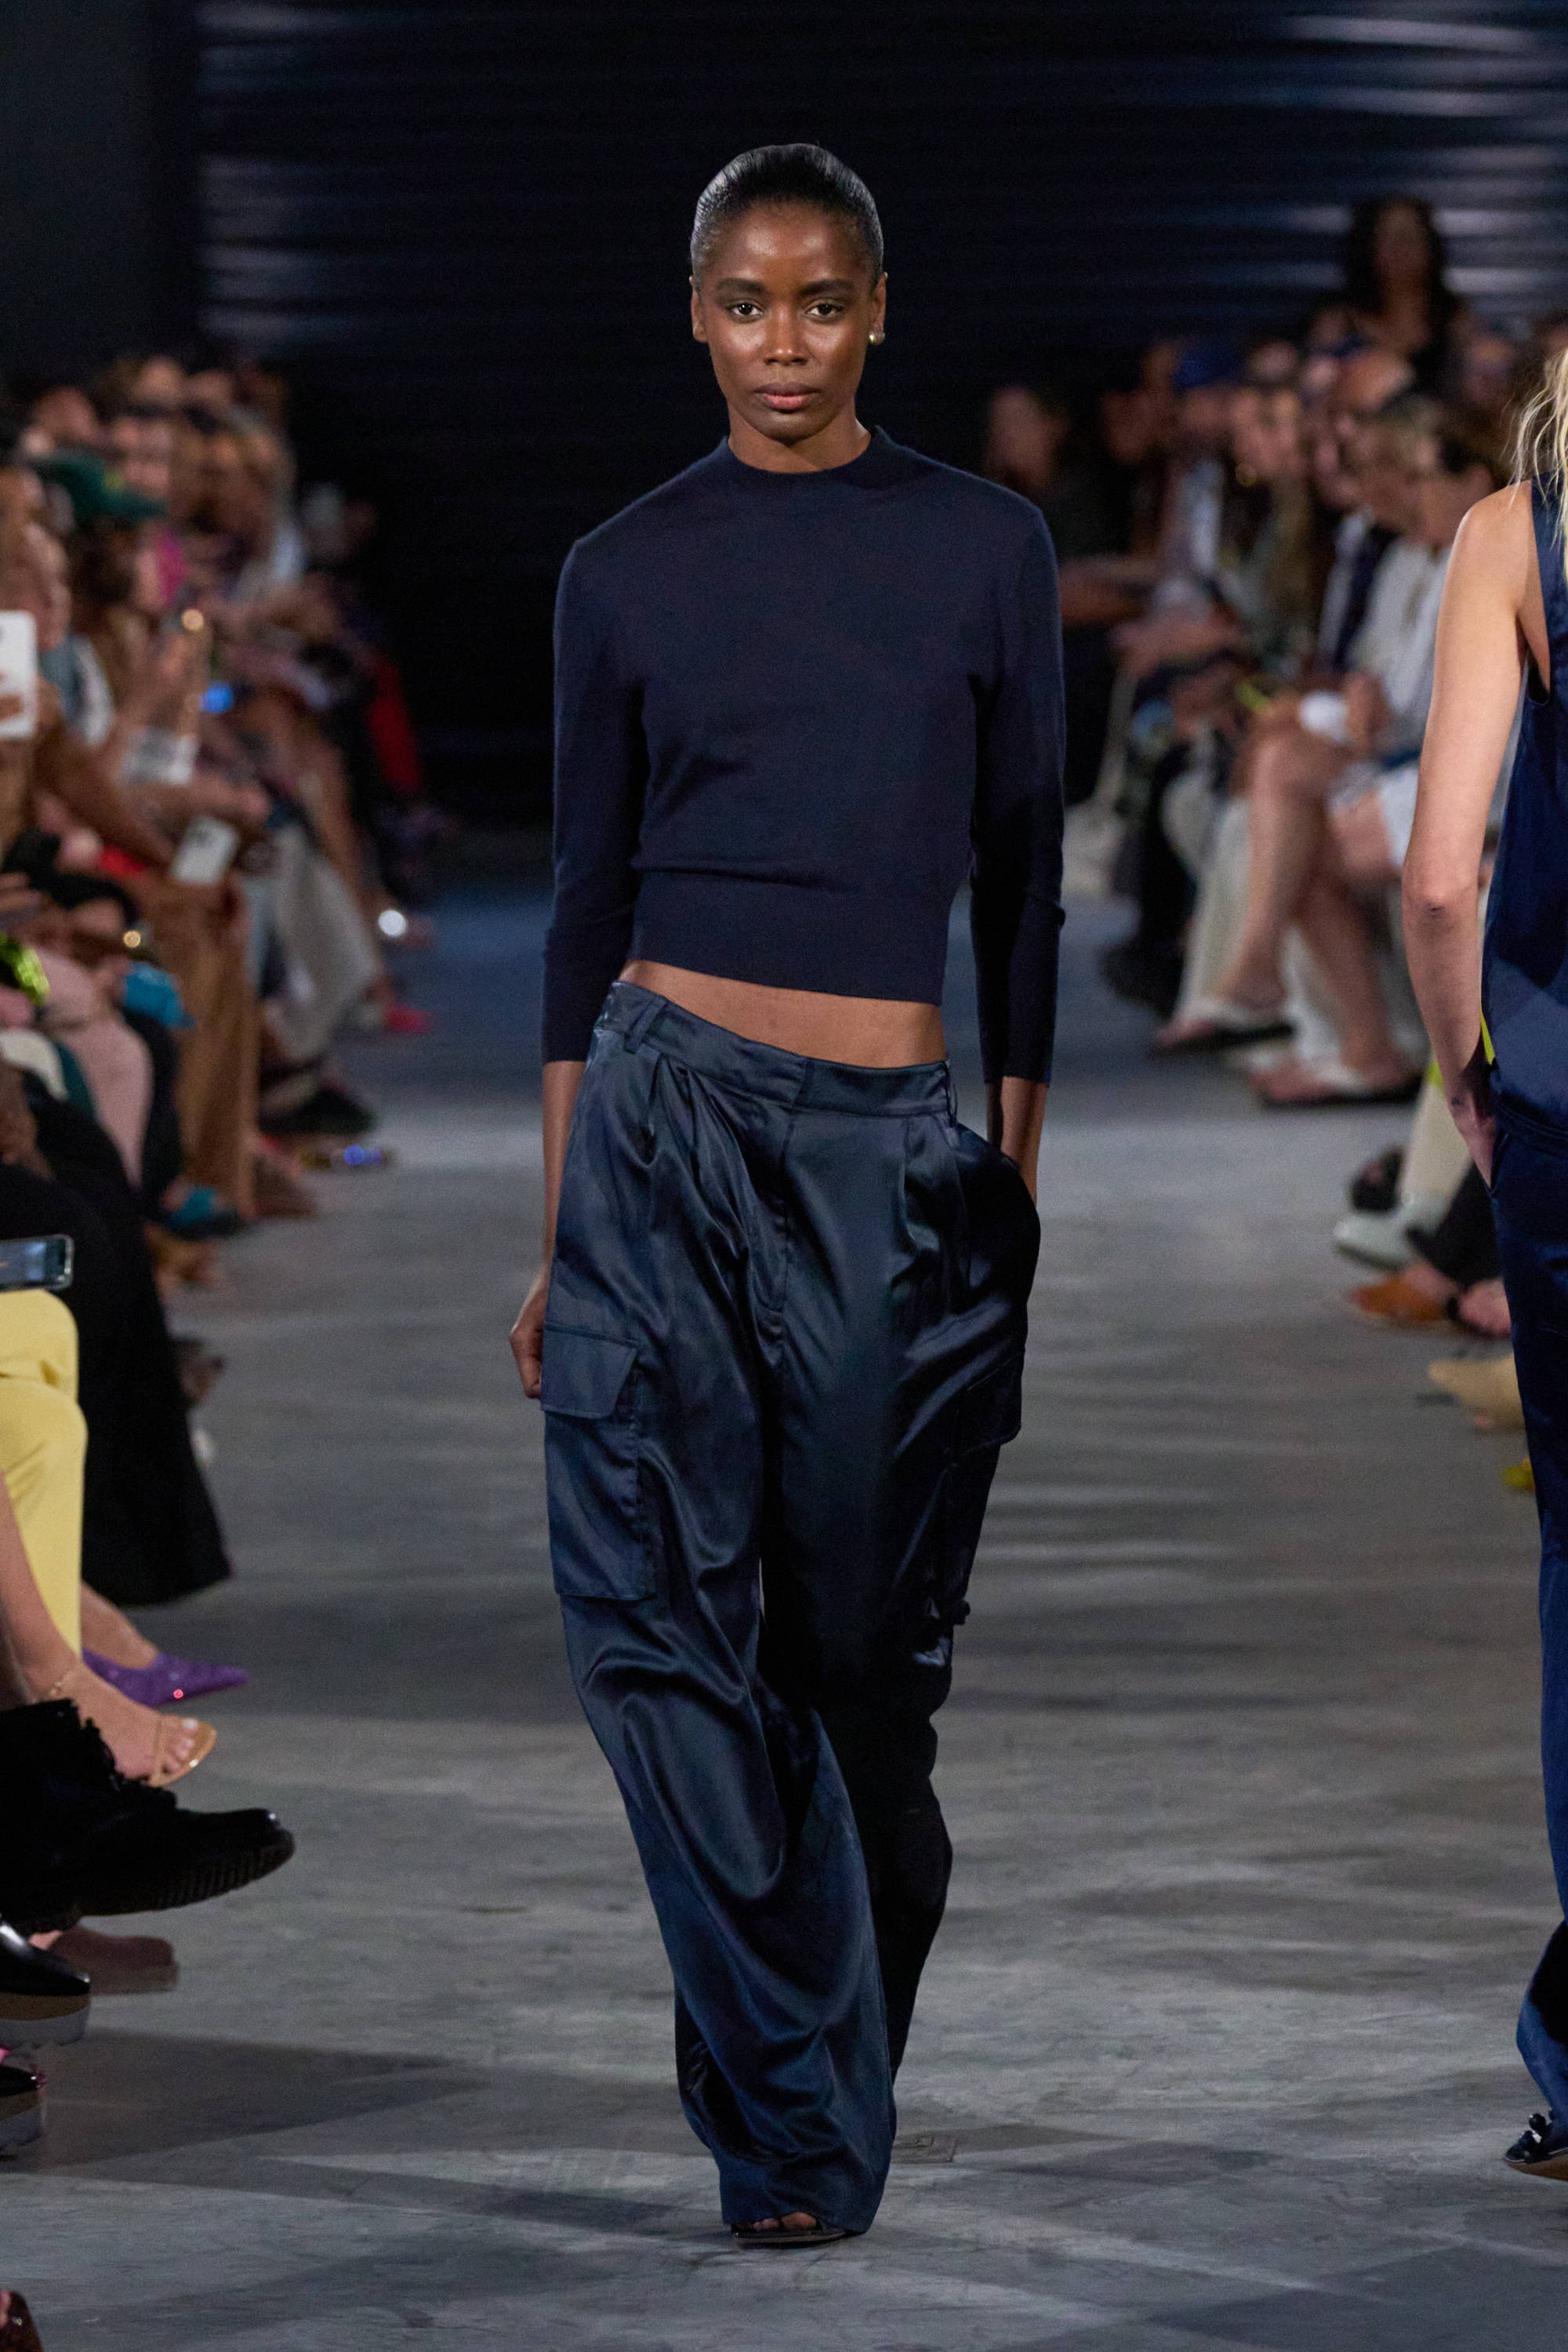 Model on a runway wearing sweater and pants